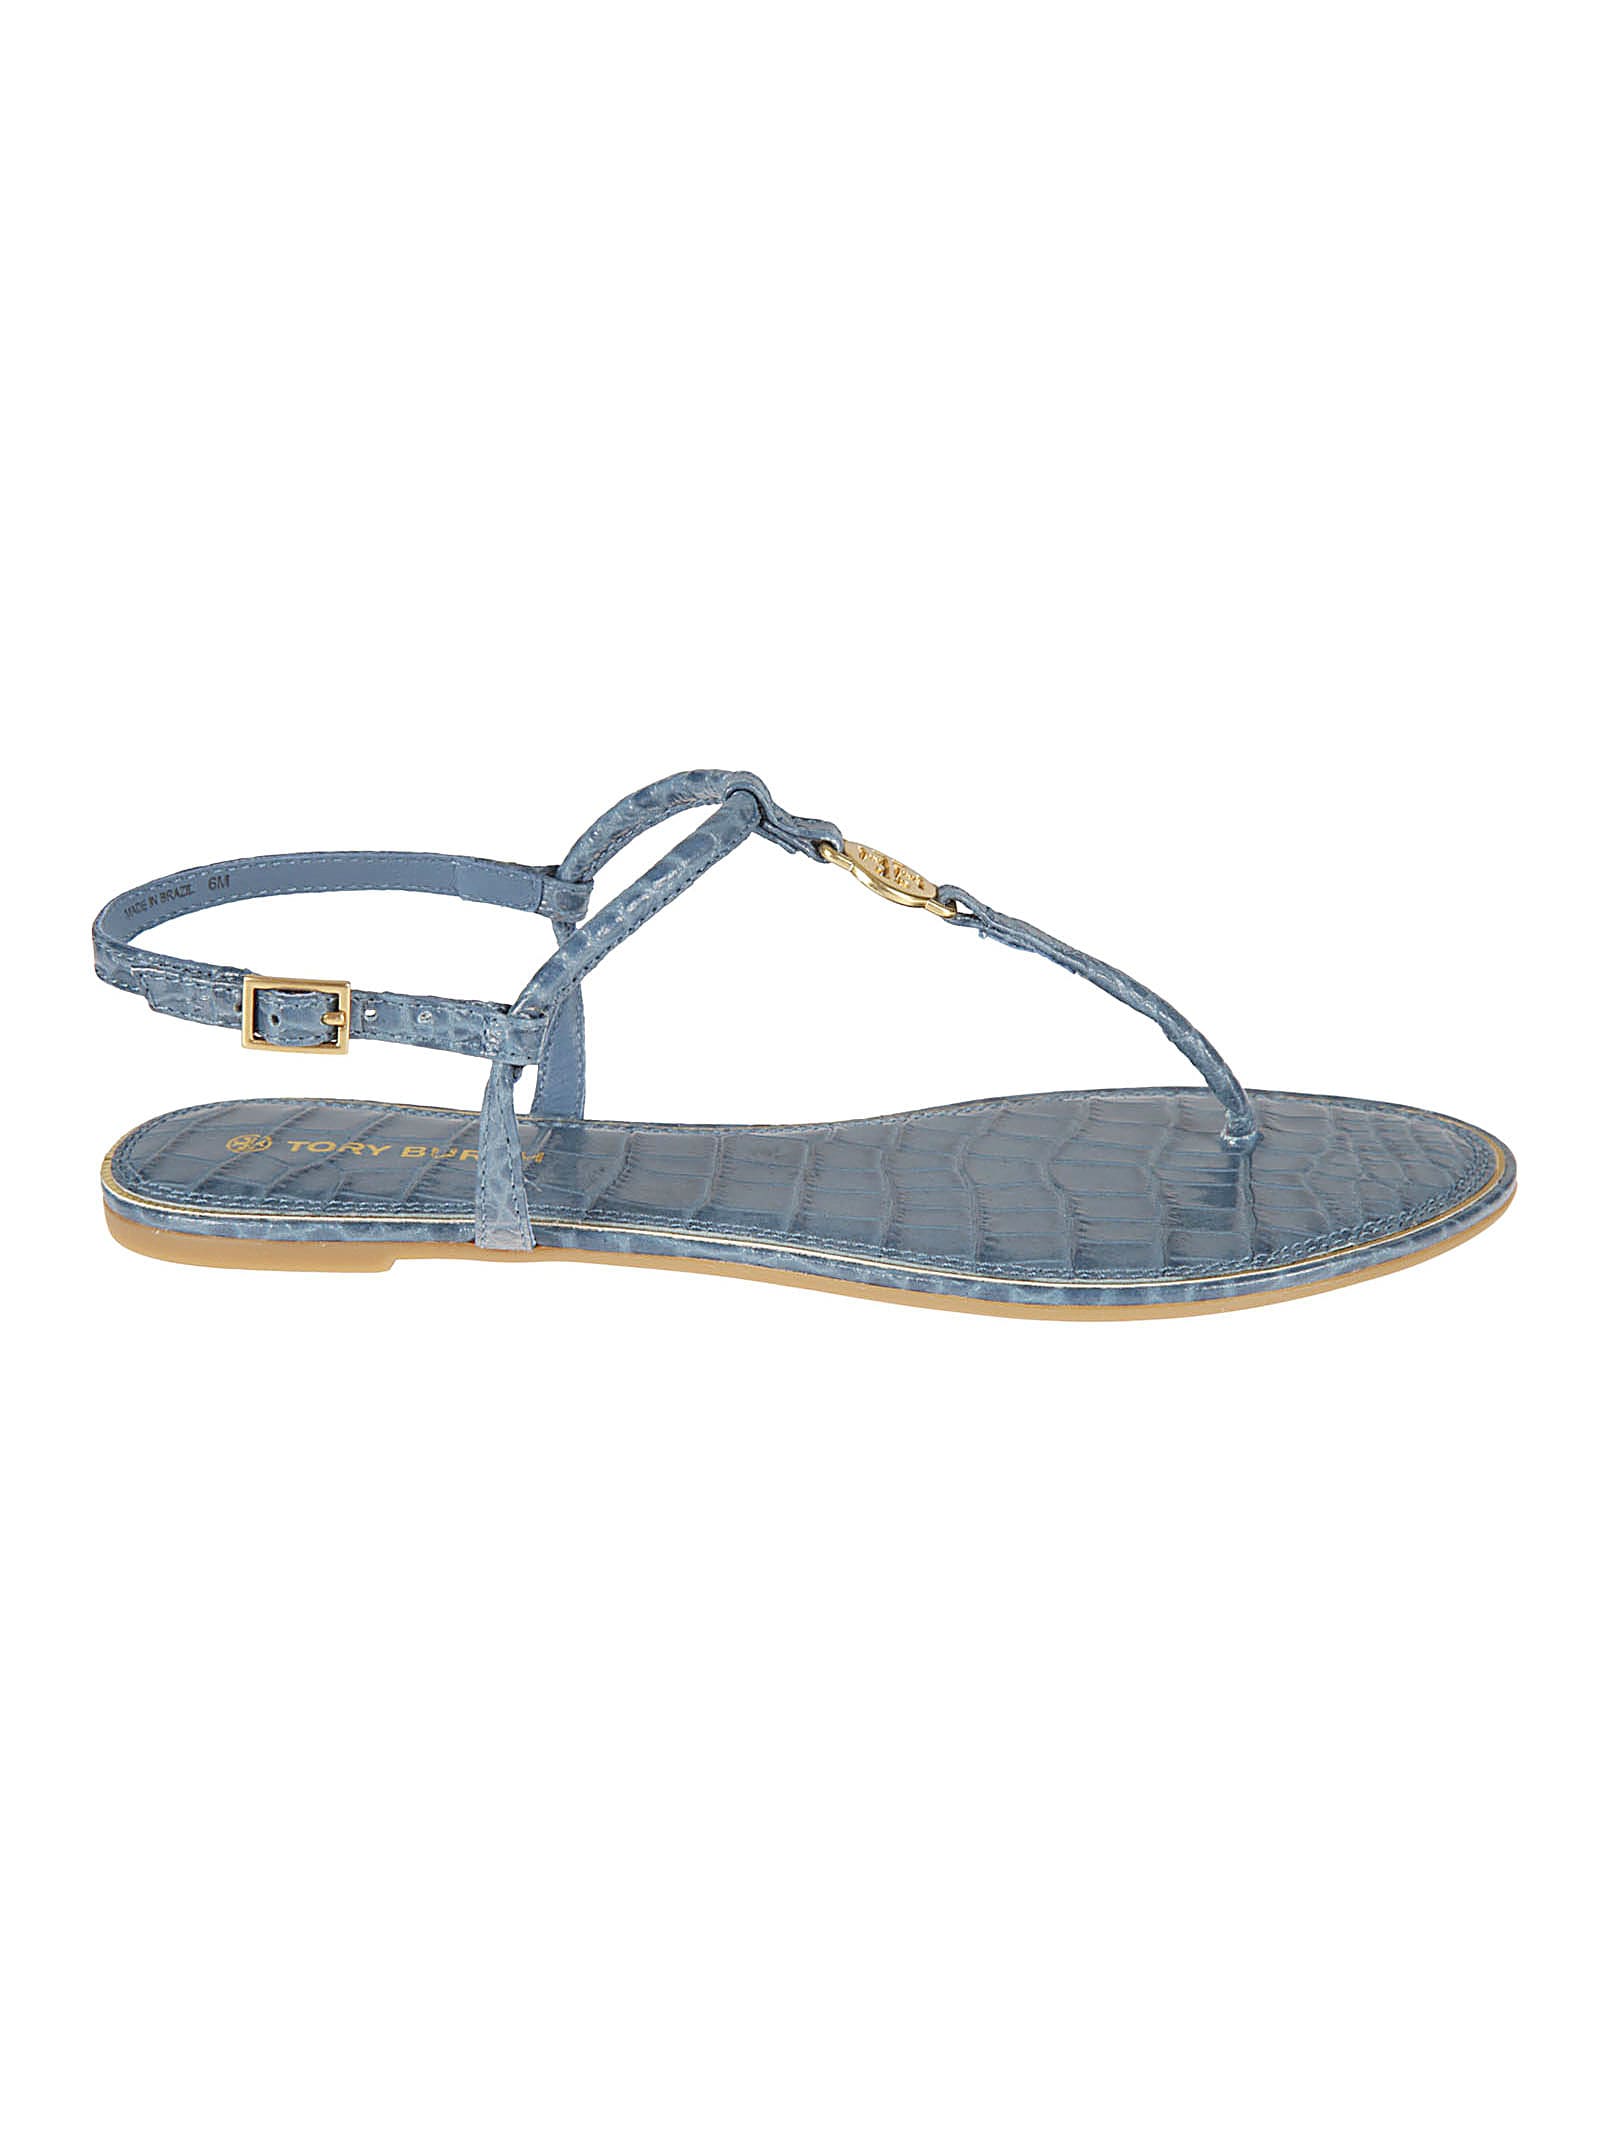 Buy Tory Burch Emy Flat Sandals online, shop Tory Burch shoes with free shipping